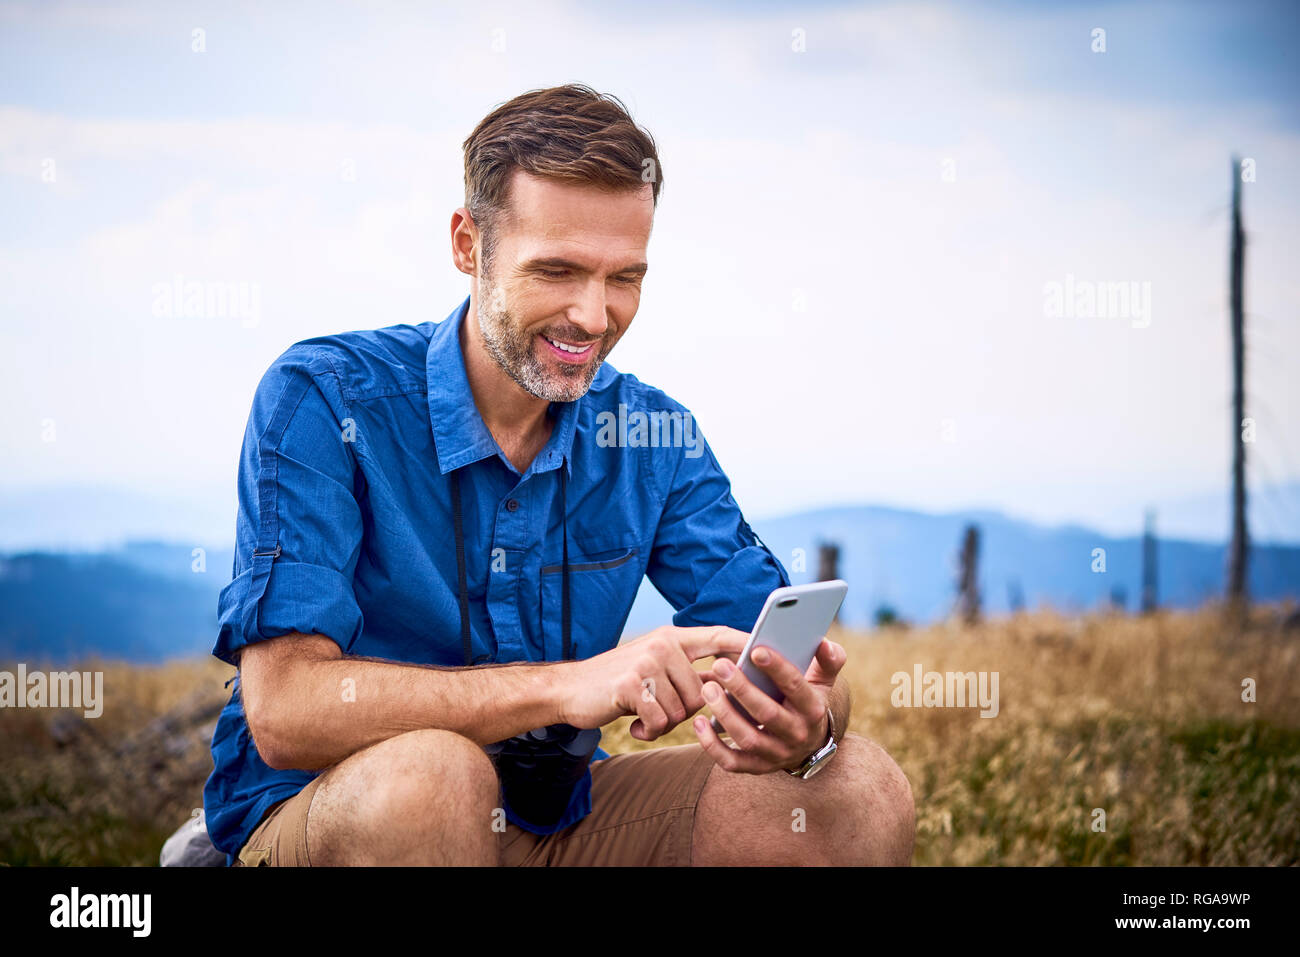 Smiling man resting and checking his cell phone during hiking trip Stock Photo